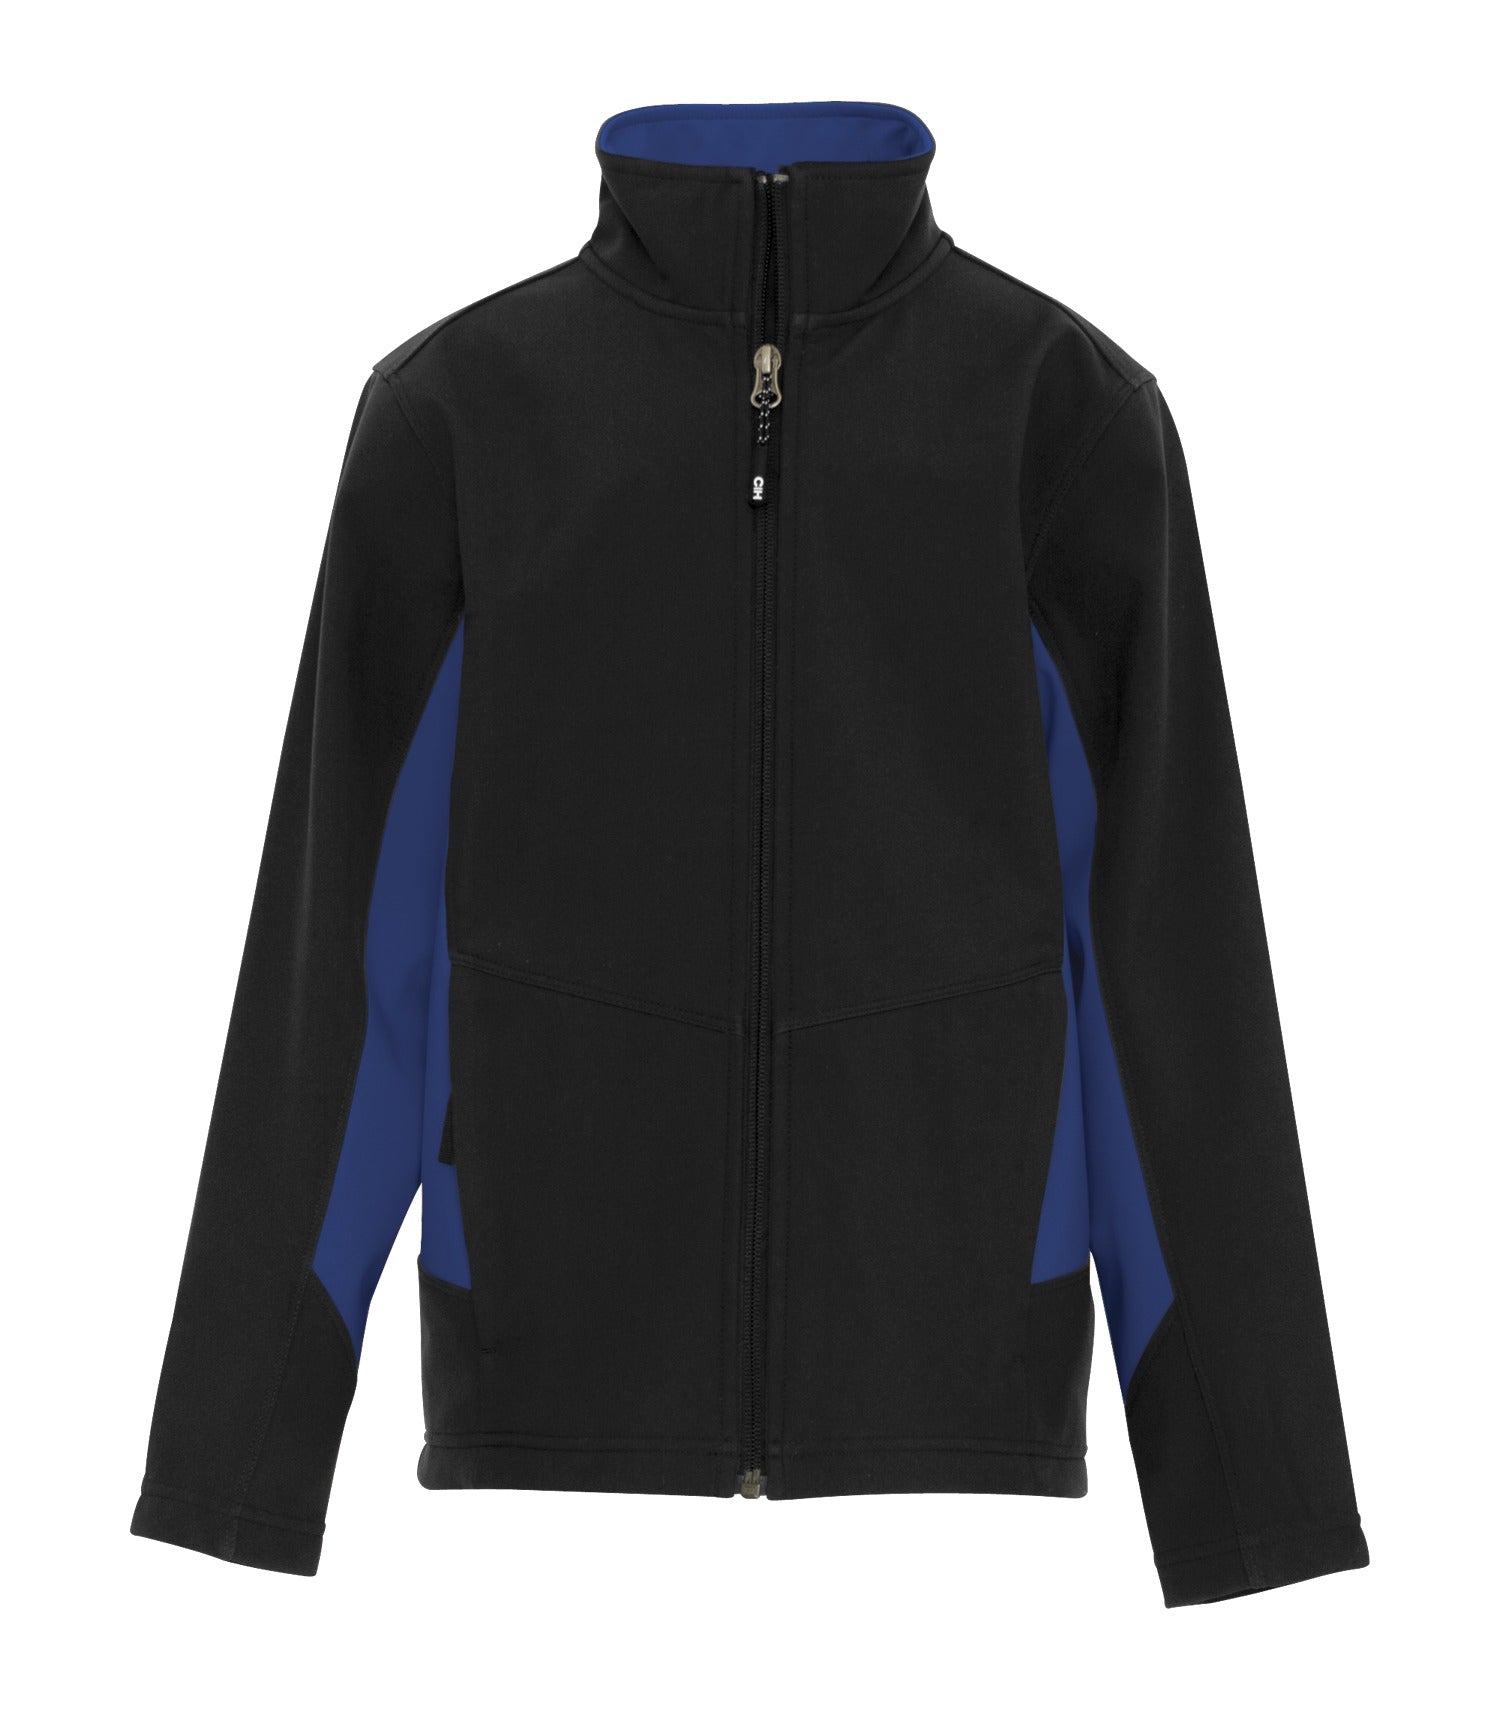 COAL HARBOUR® EVERYDAY COLOUR BLOCK WATER REPELLENT SOFT SHELL YOUTH JACKET. Y7604